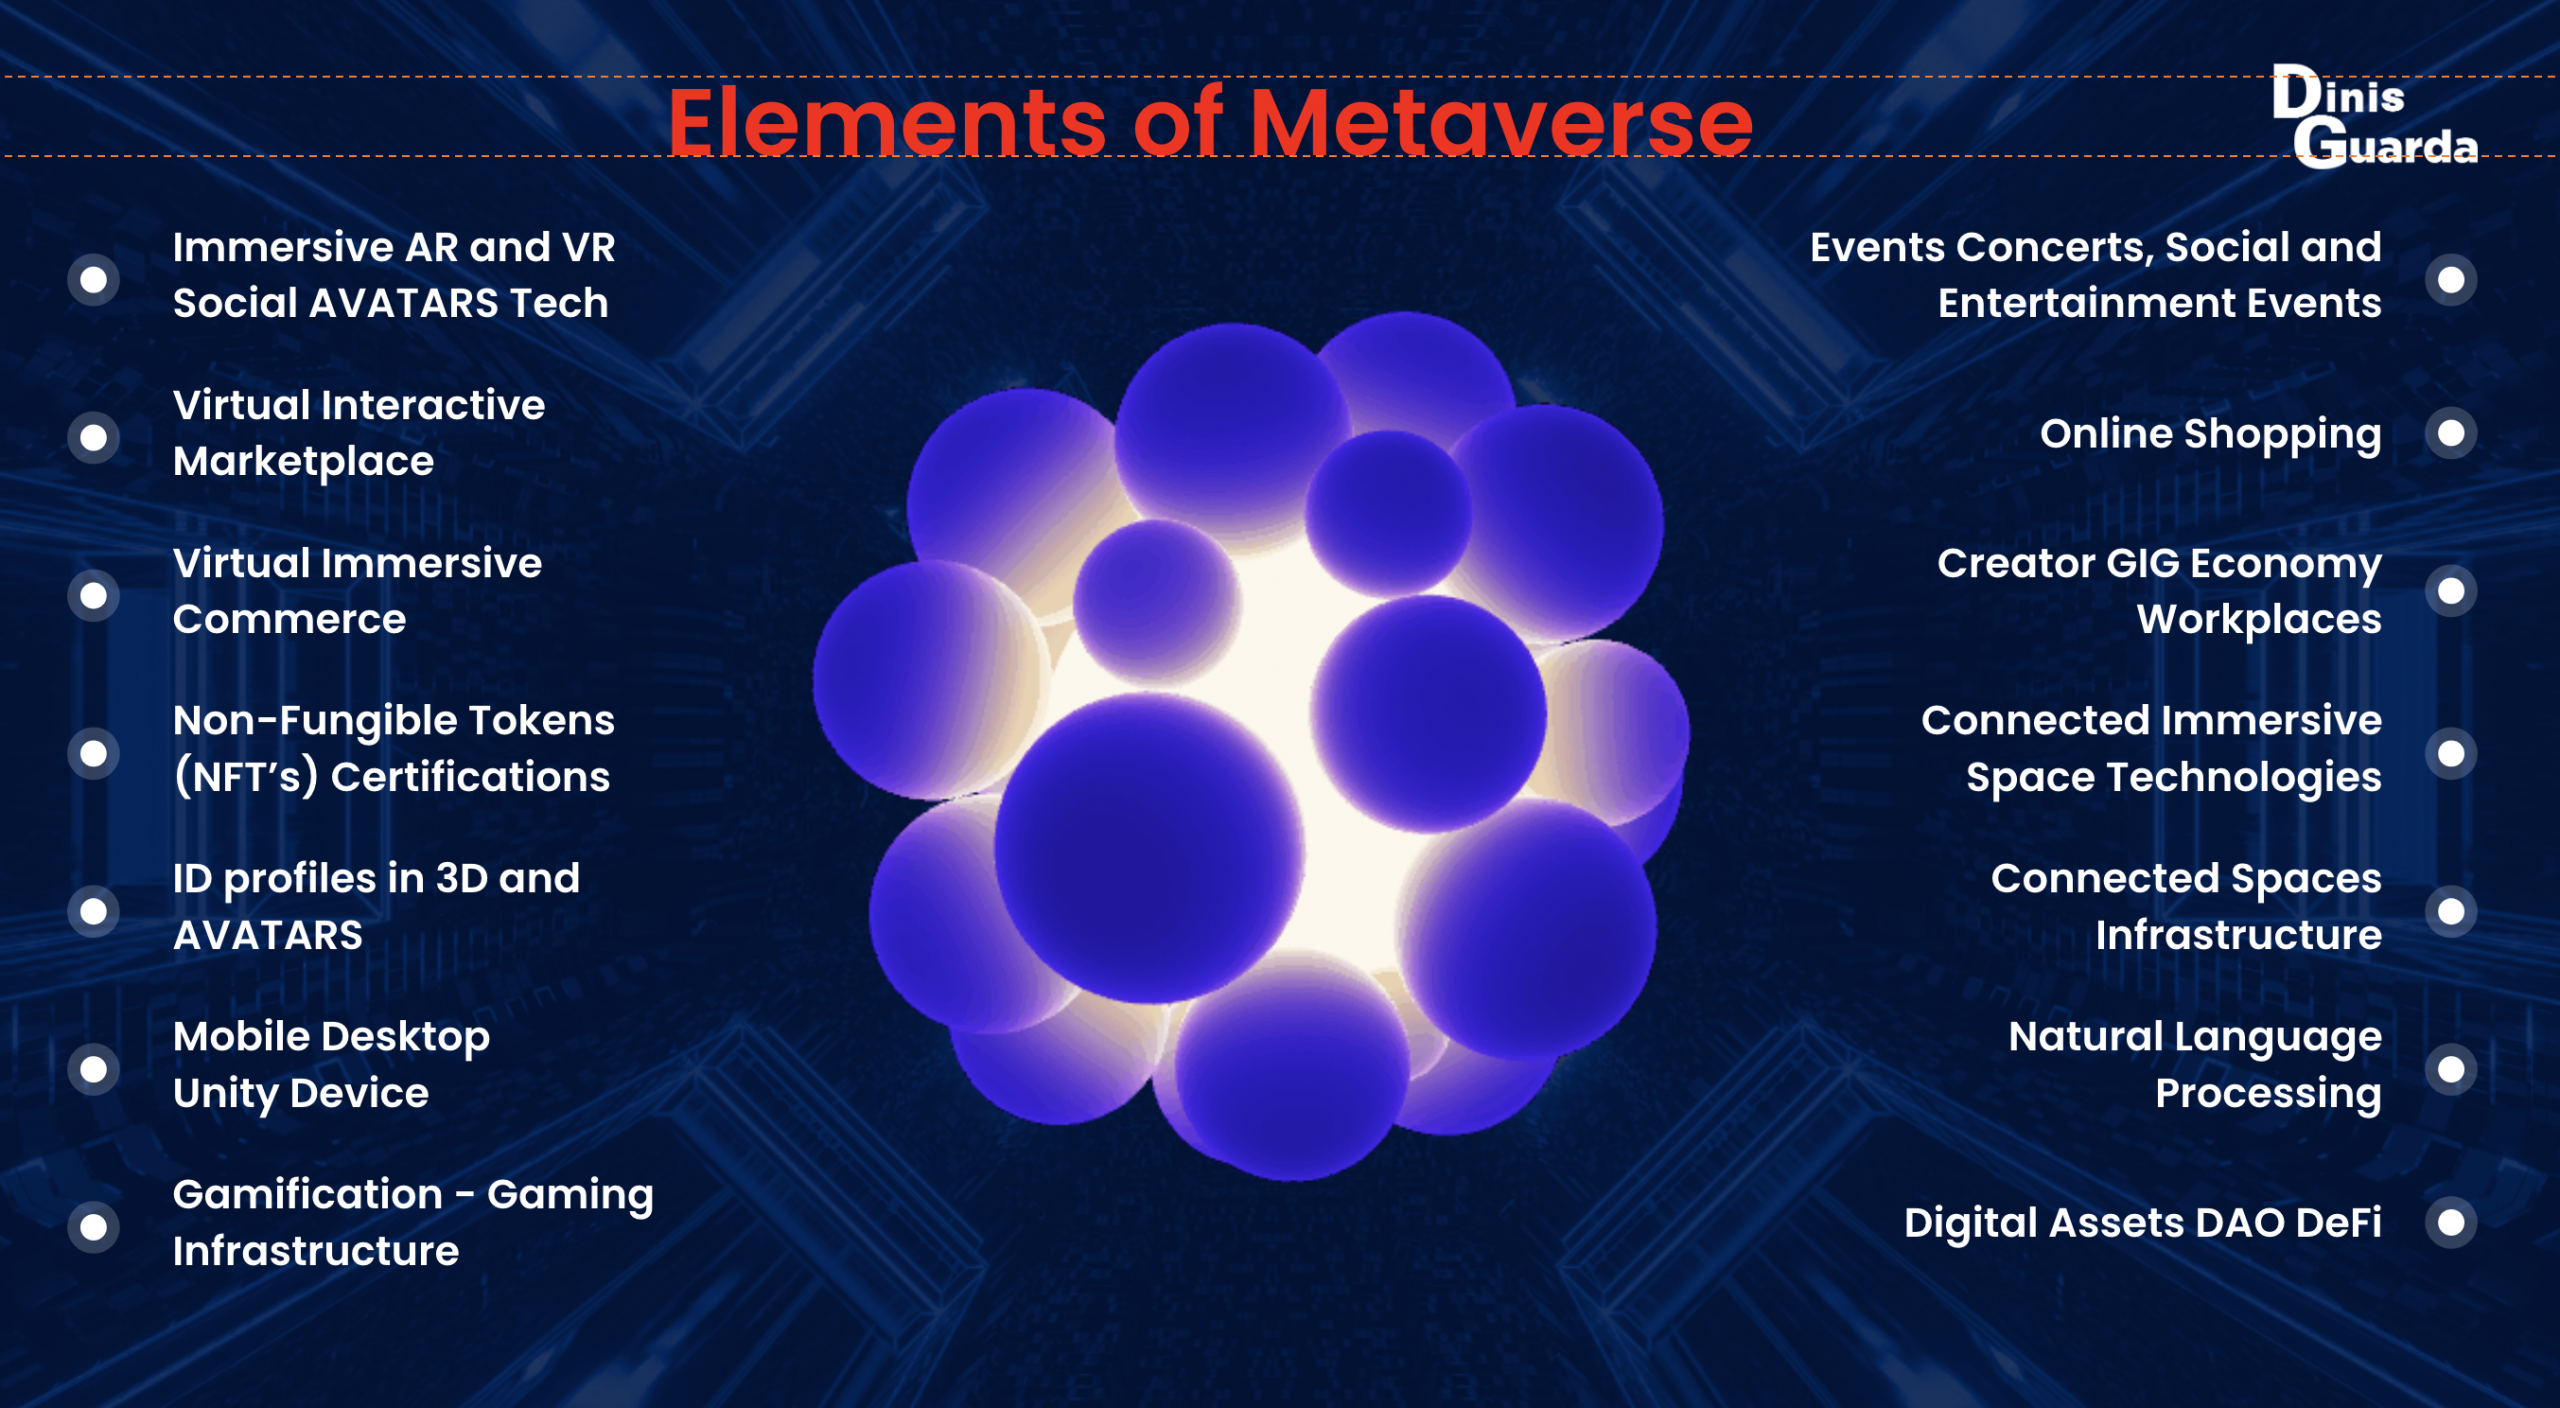 Elements of metaverse, infographic by Dinis Guarda